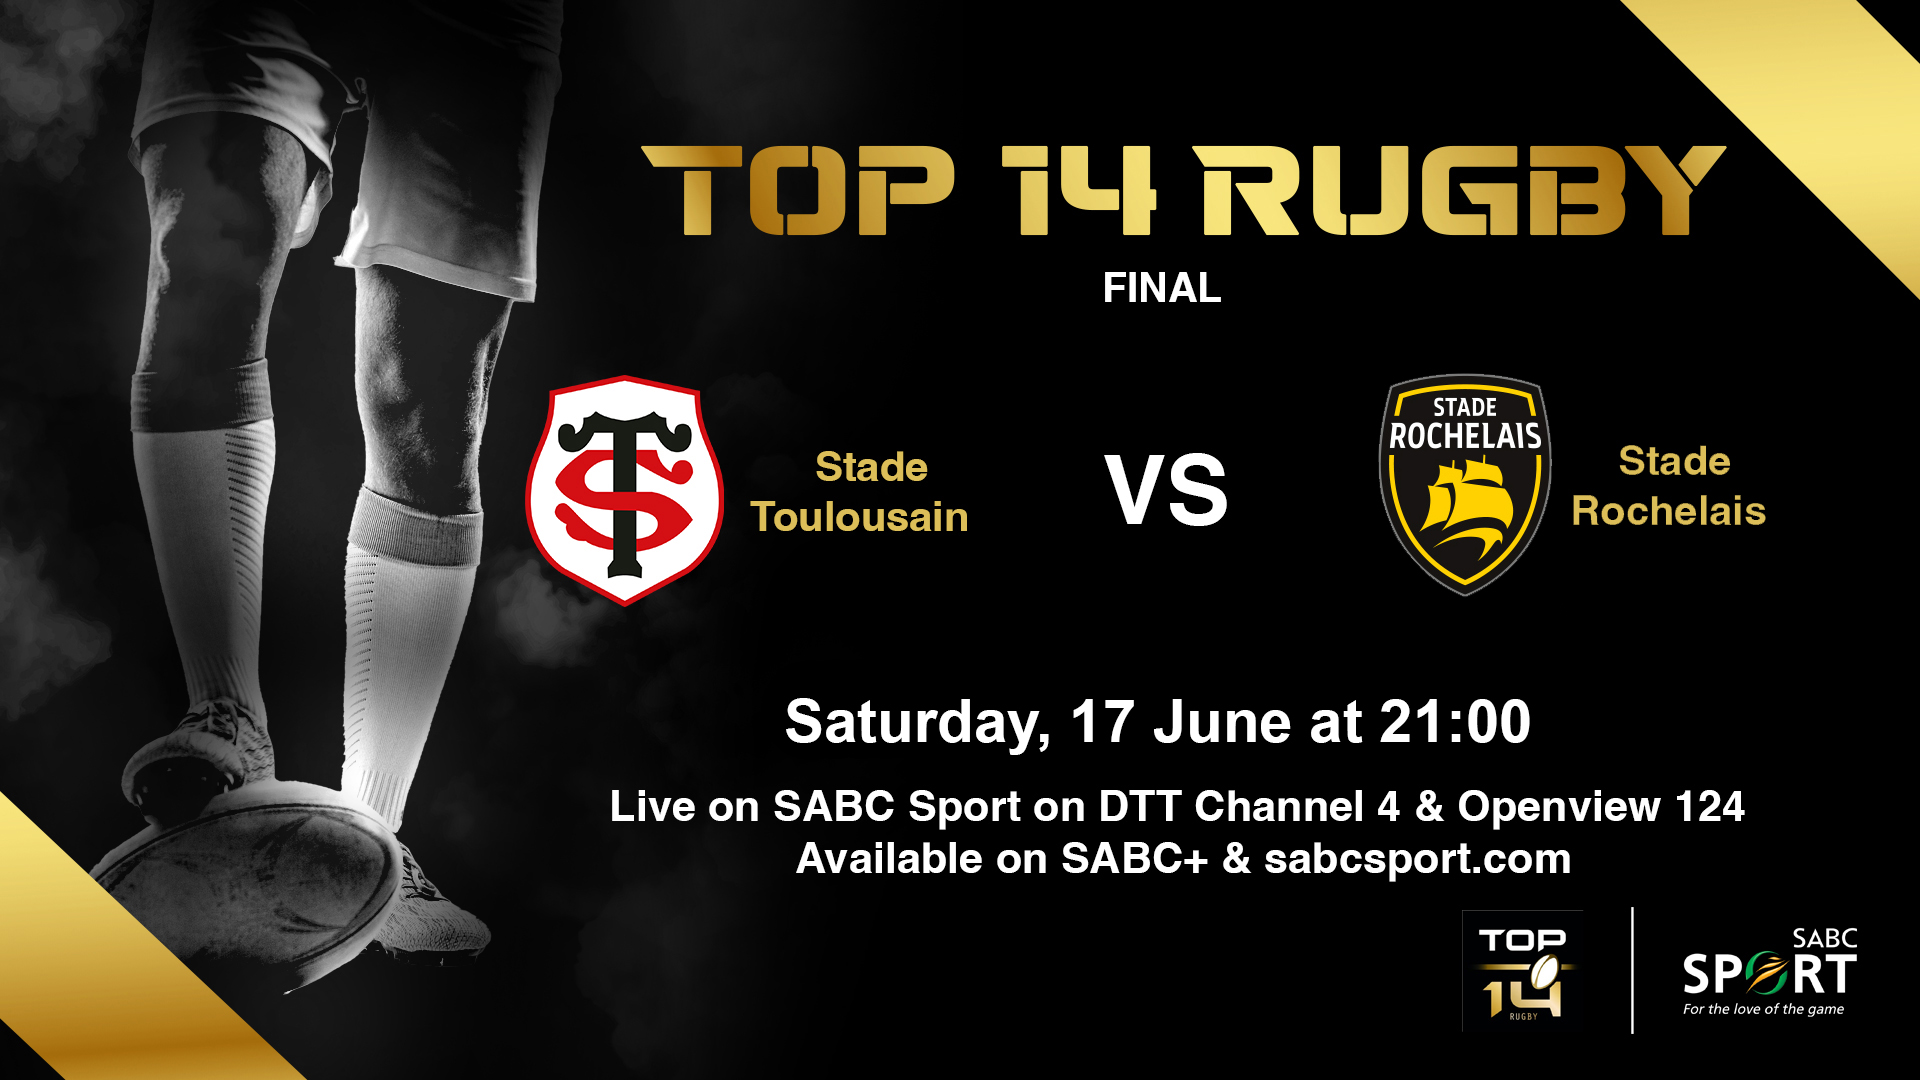 SABC Sport on Twitter: "🏉 Game Day Catch all the thrilling action in the #TOP14RugbyFinal 🔥 👥 Stade Toulousain 🆚 Stade Rochelais 🗓️Sat, 17 June 📺 SABC Sport Channel